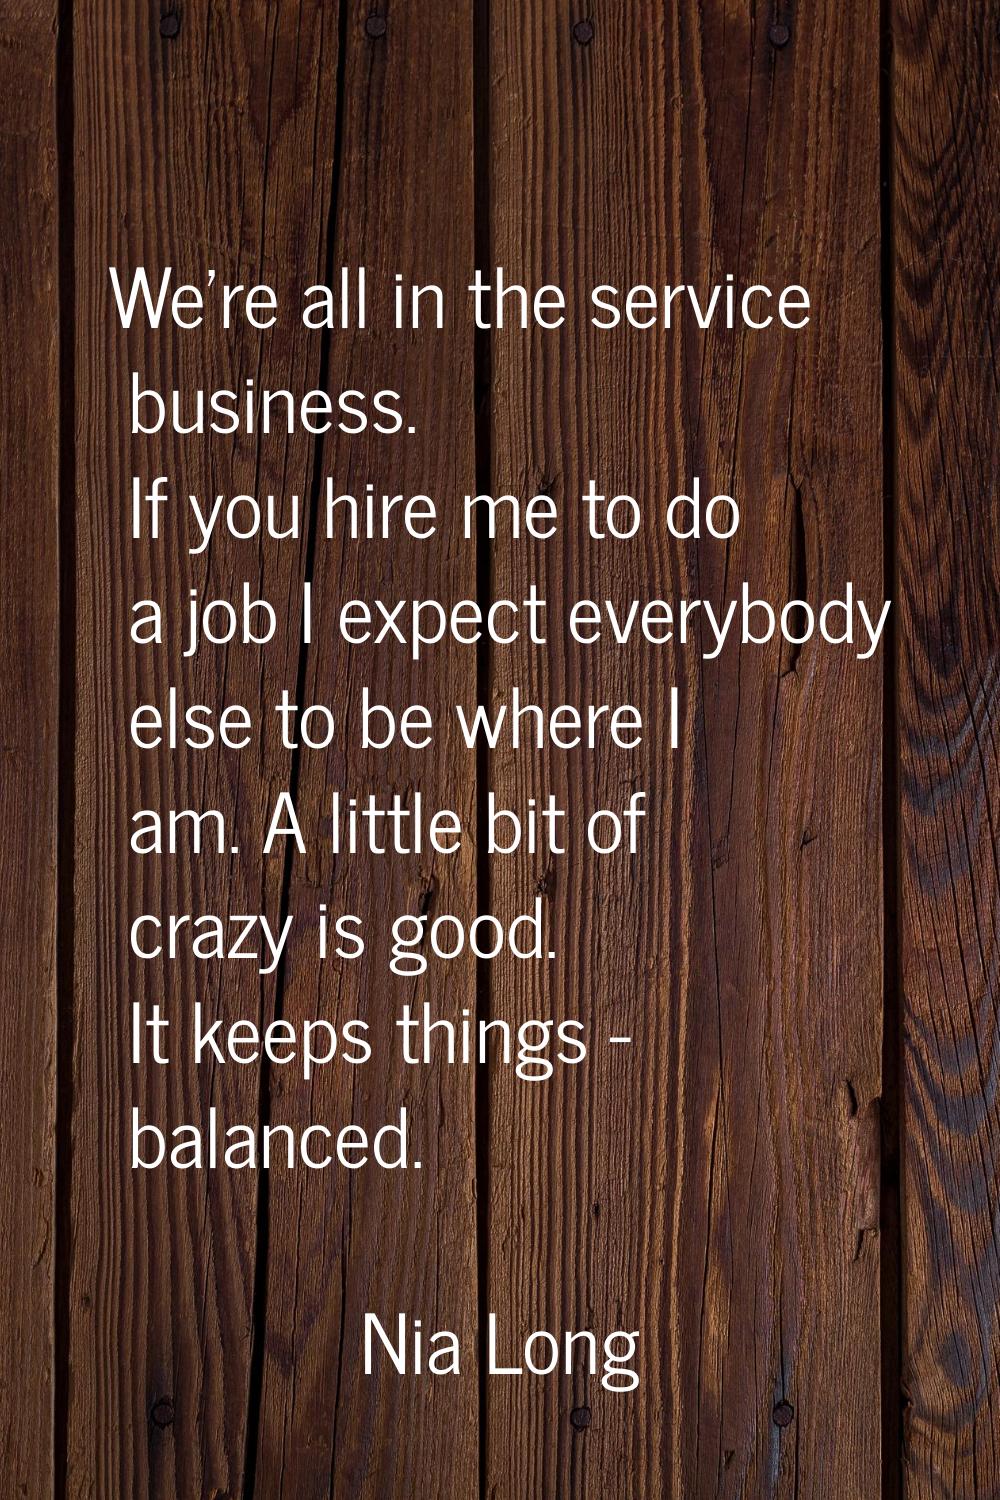 We're all in the service business. If you hire me to do a job I expect everybody else to be where I